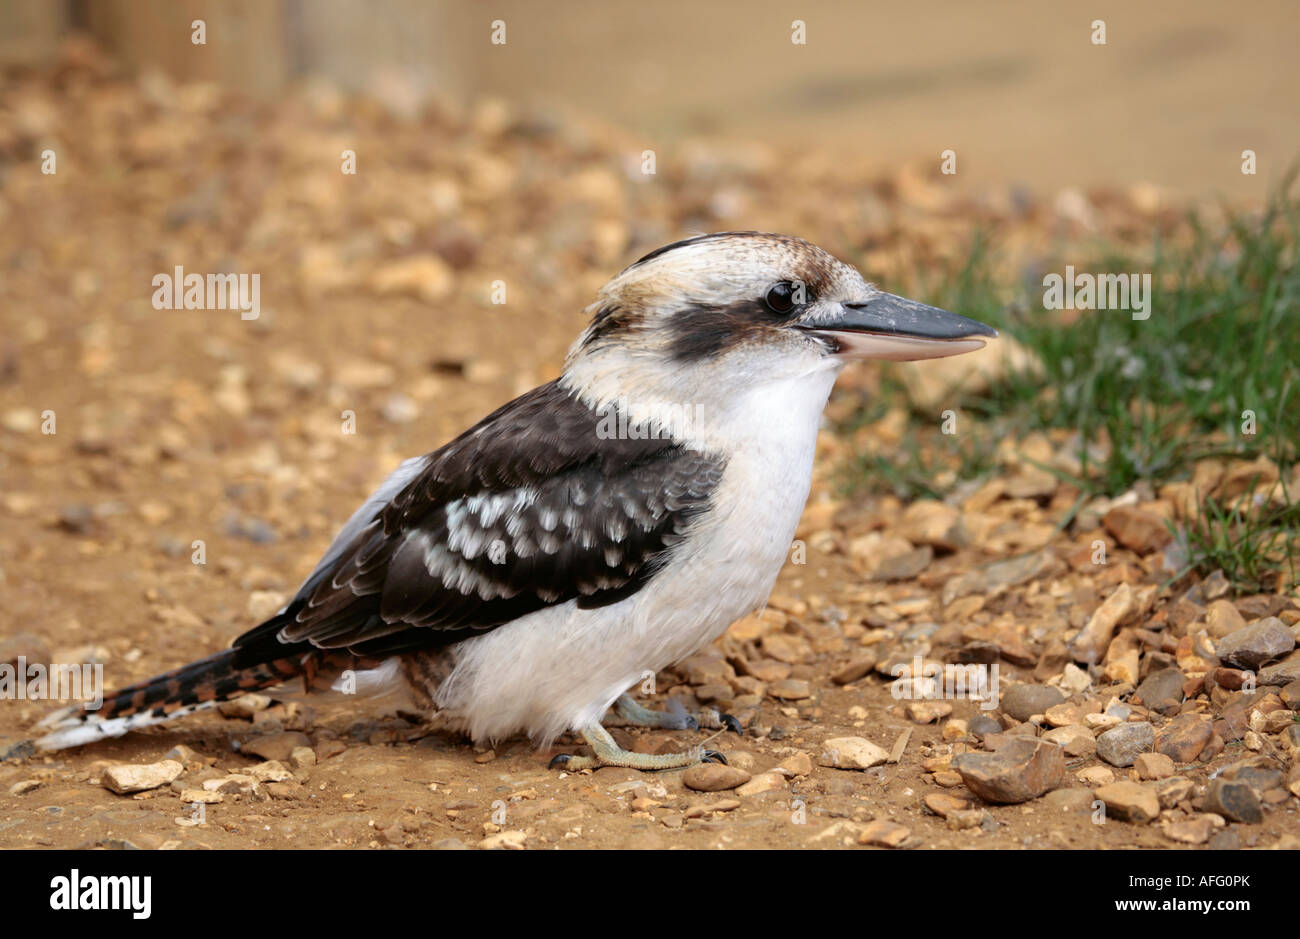 A single adult Laughing Kookaburra on ground foraging for insects Stock Photo